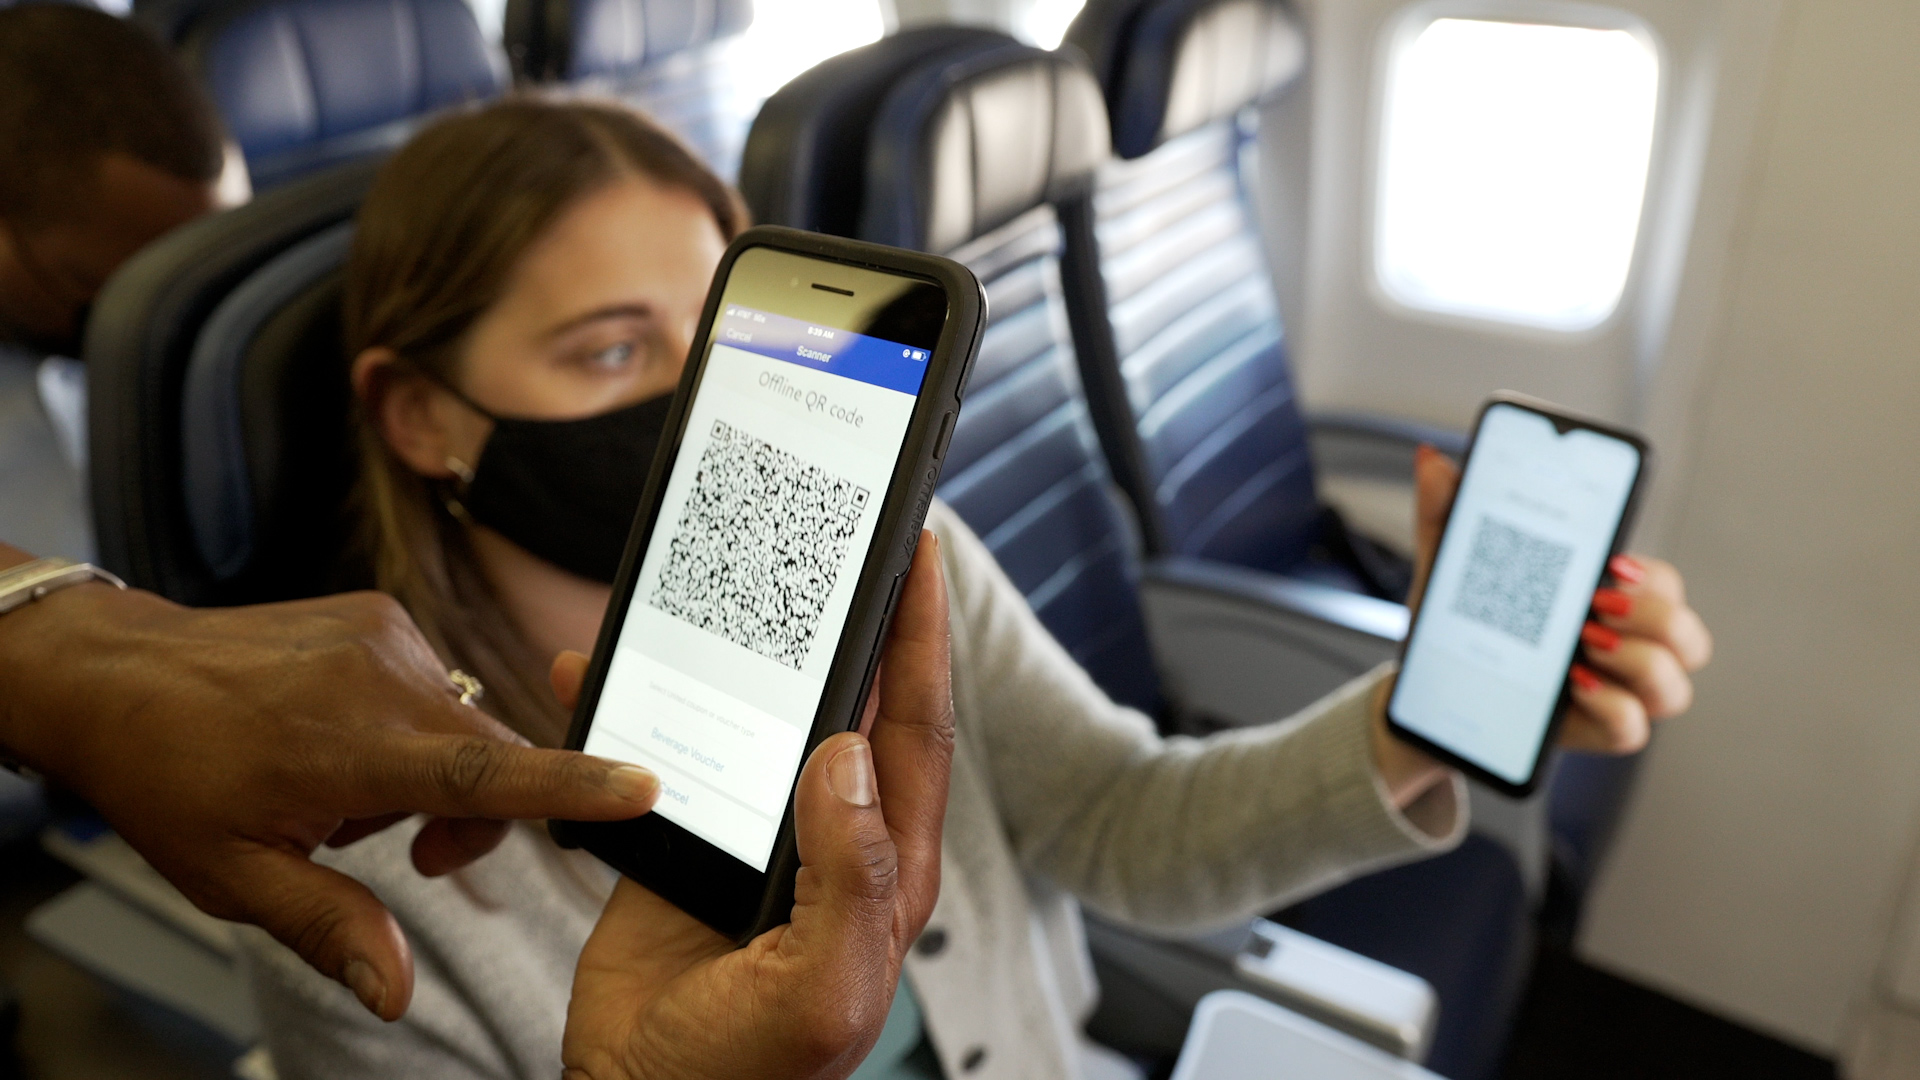 United fliers can soon use PayPal’s new QR codes to buy chips and booze in the sky